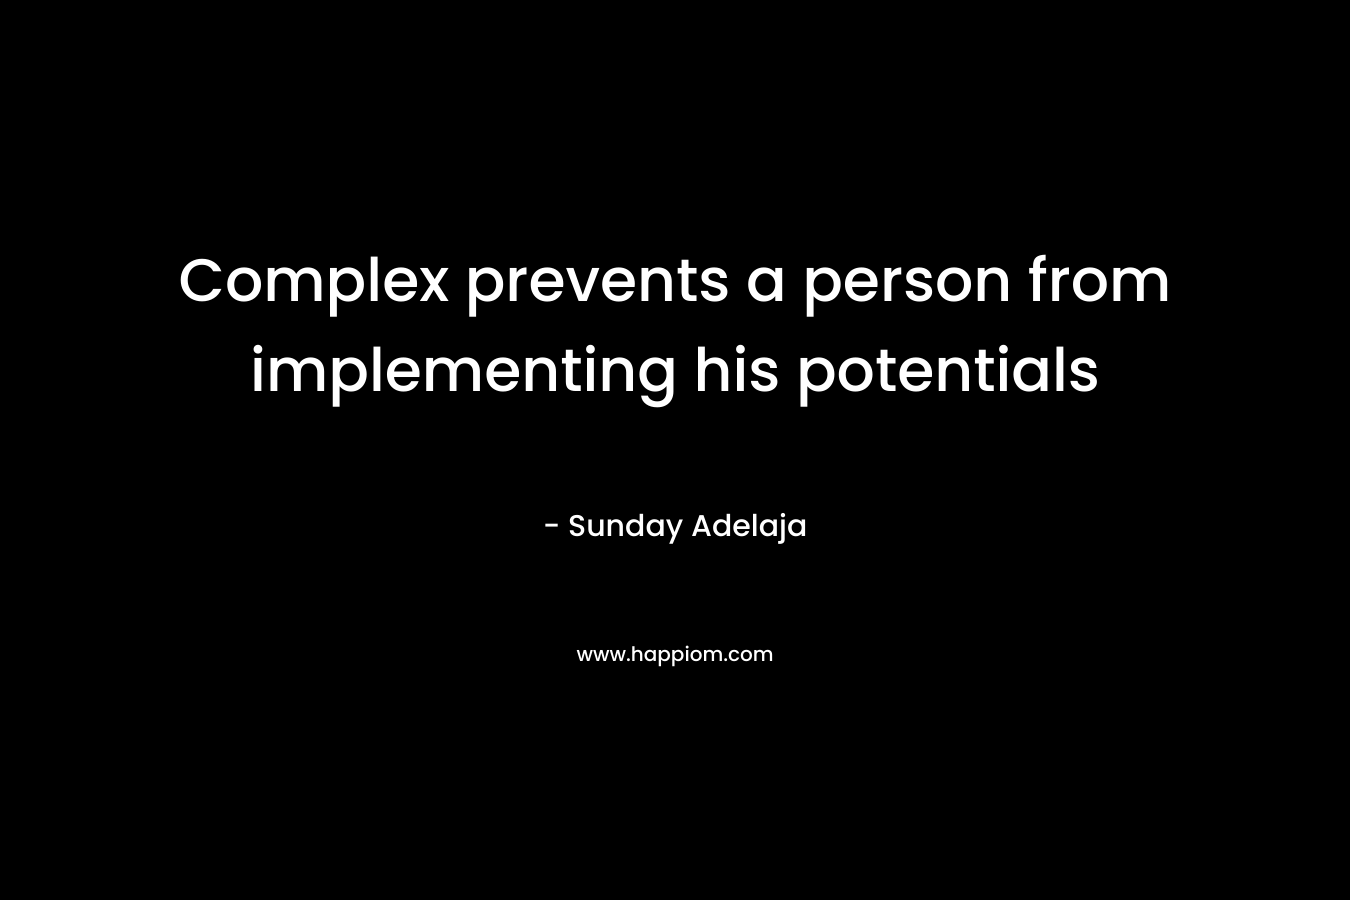 Complex prevents a person from implementing his potentials